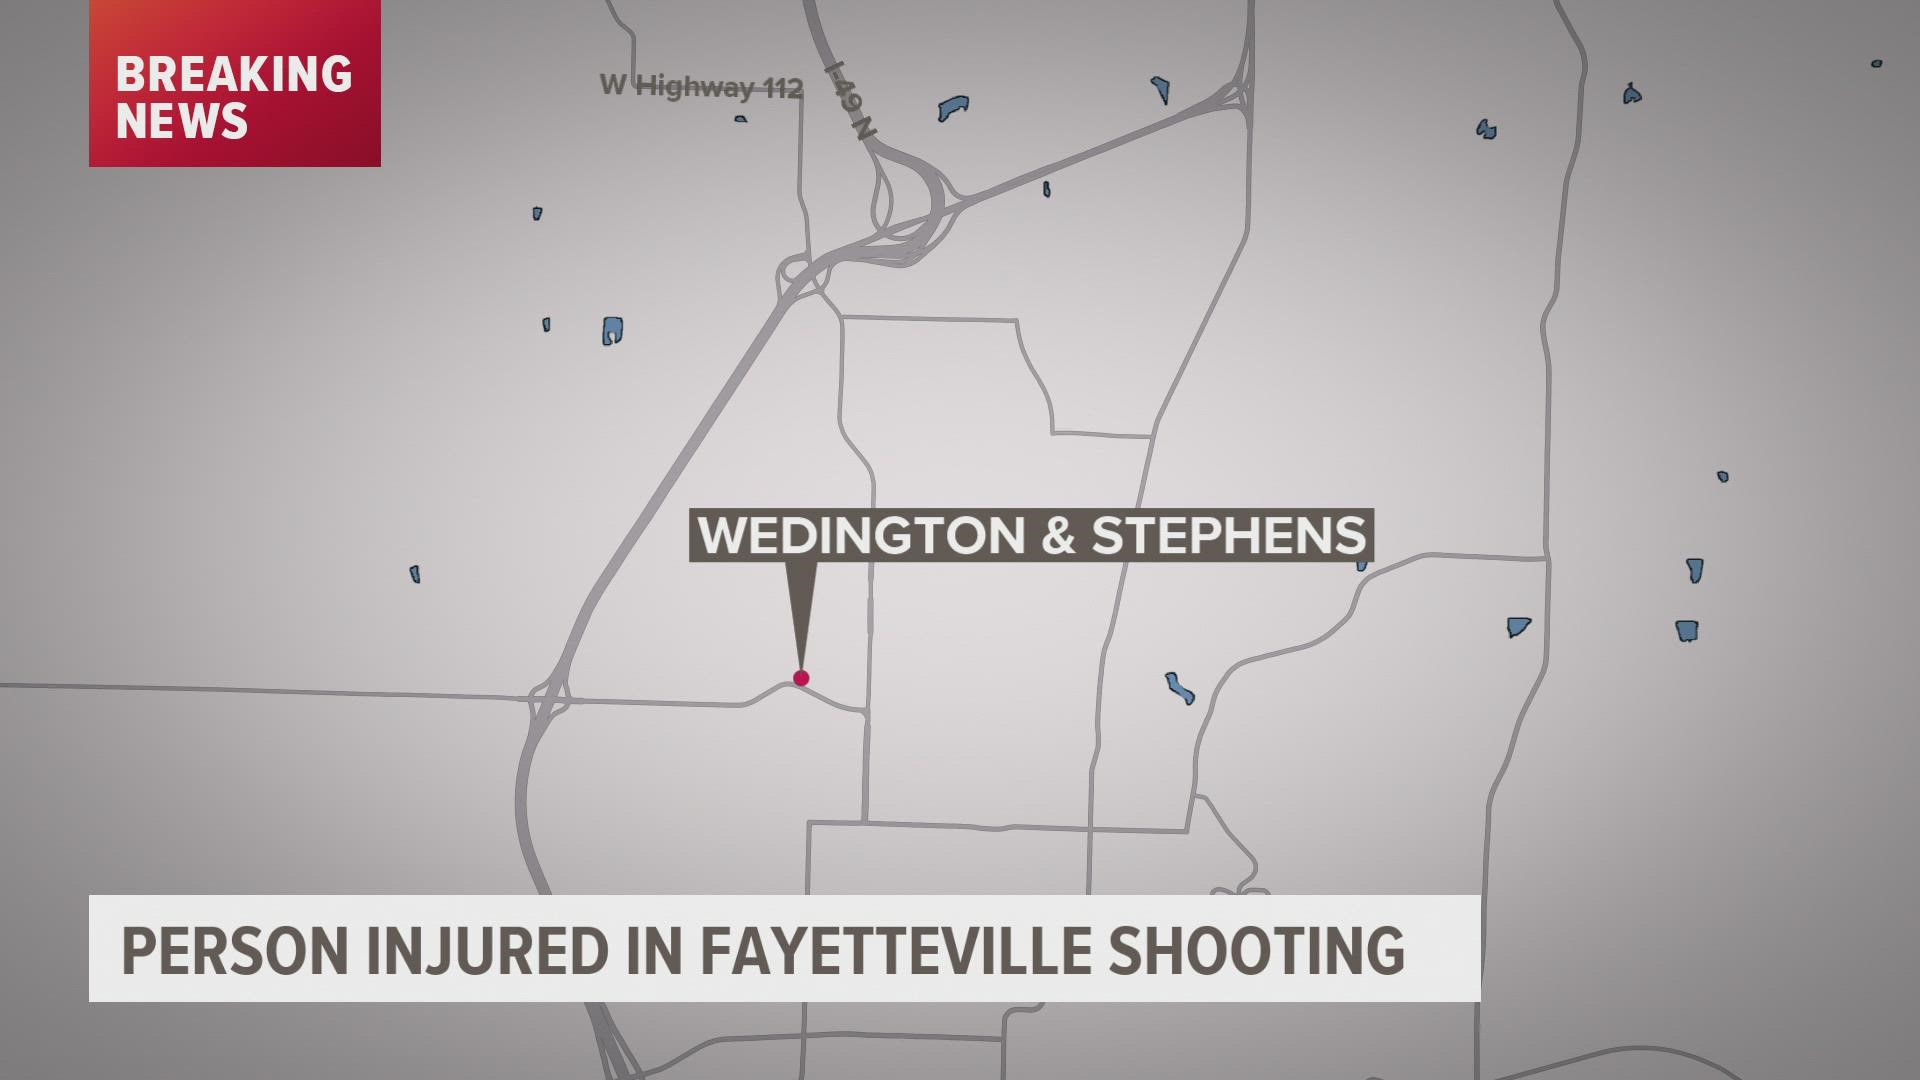 On Tuesday, August 10 at 7:08 P.M., the Fayetteville Police Department received a call about a shooting in the area of W. Wedington Dr. near Stephens Ave. in Fayette